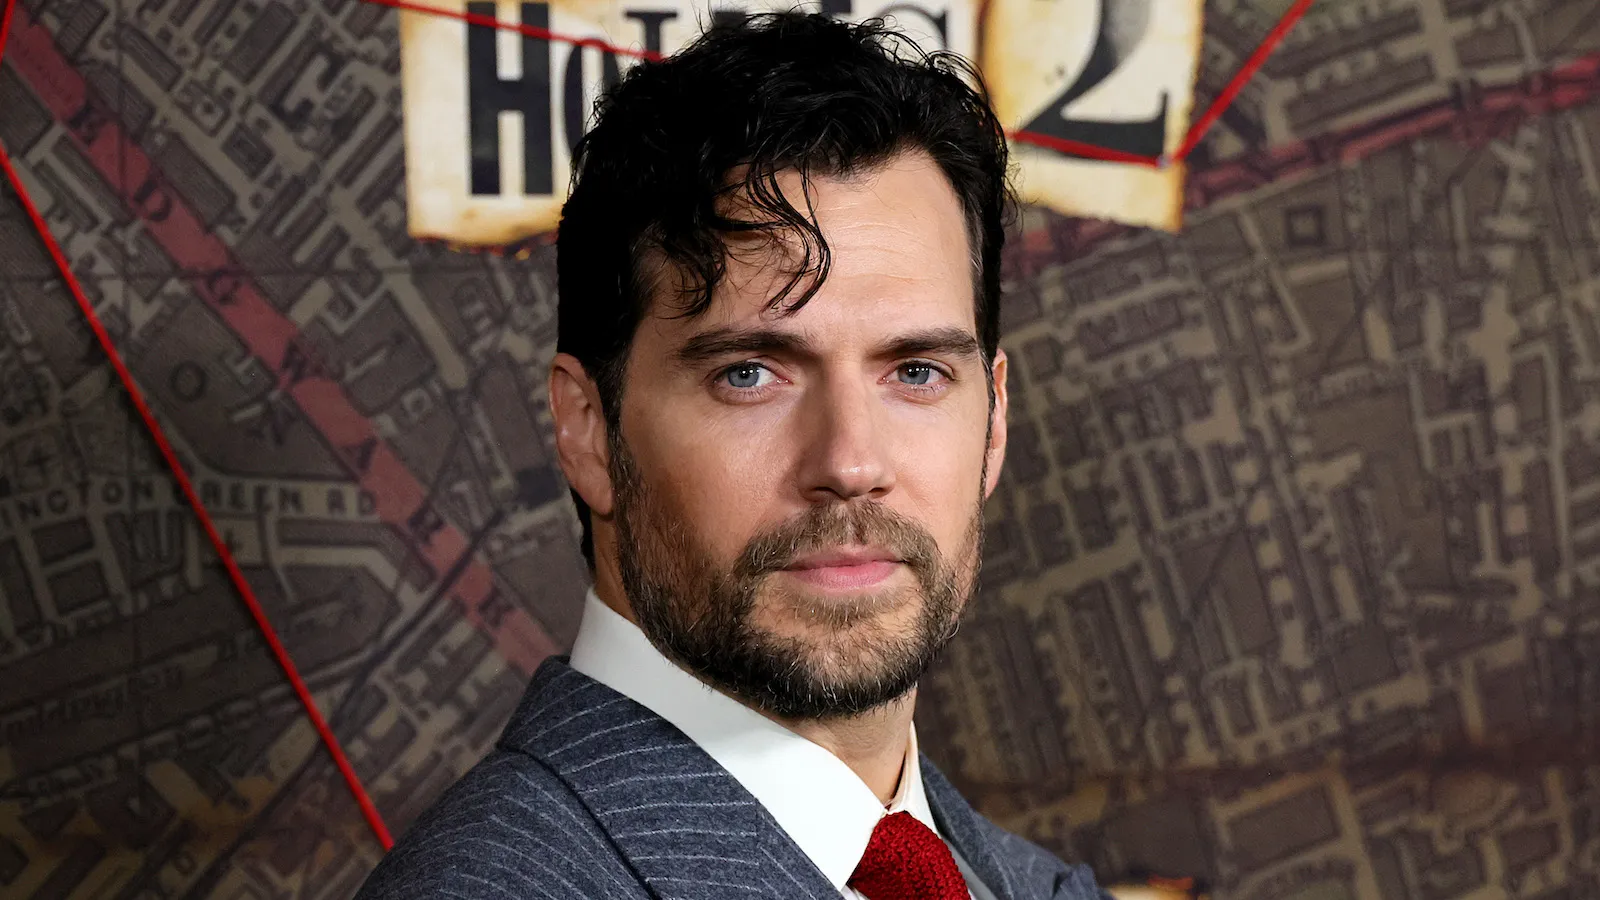 Henry Cavill Age, Net Worth, and is He a Twin? Answered.